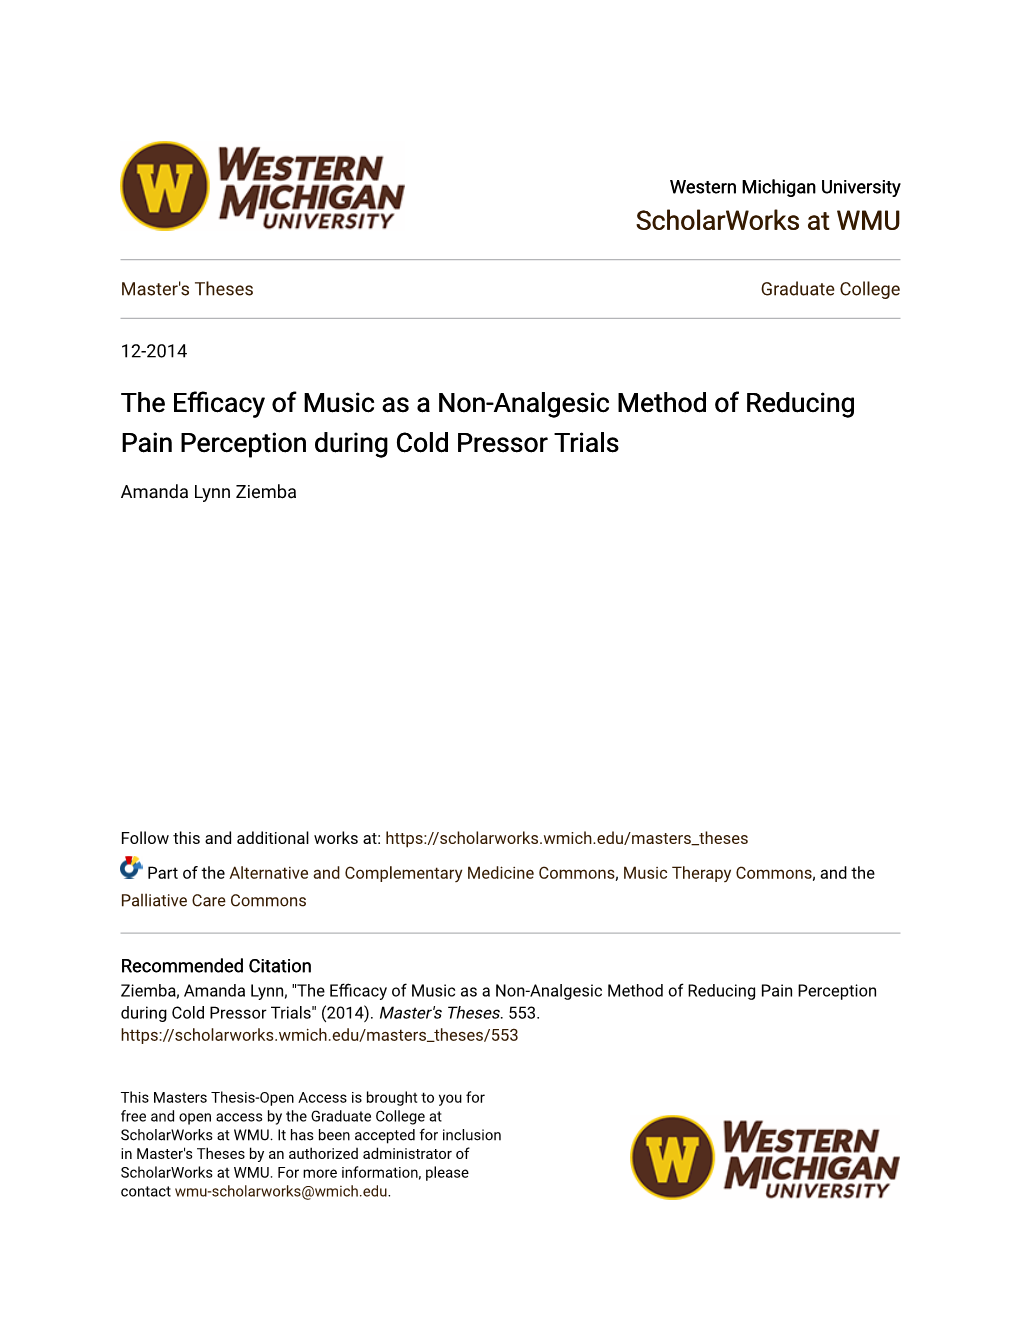 The Efficacy of Music As a Non-Analgesic Method of Reducing Pain Perception During Cold Pressor Trials